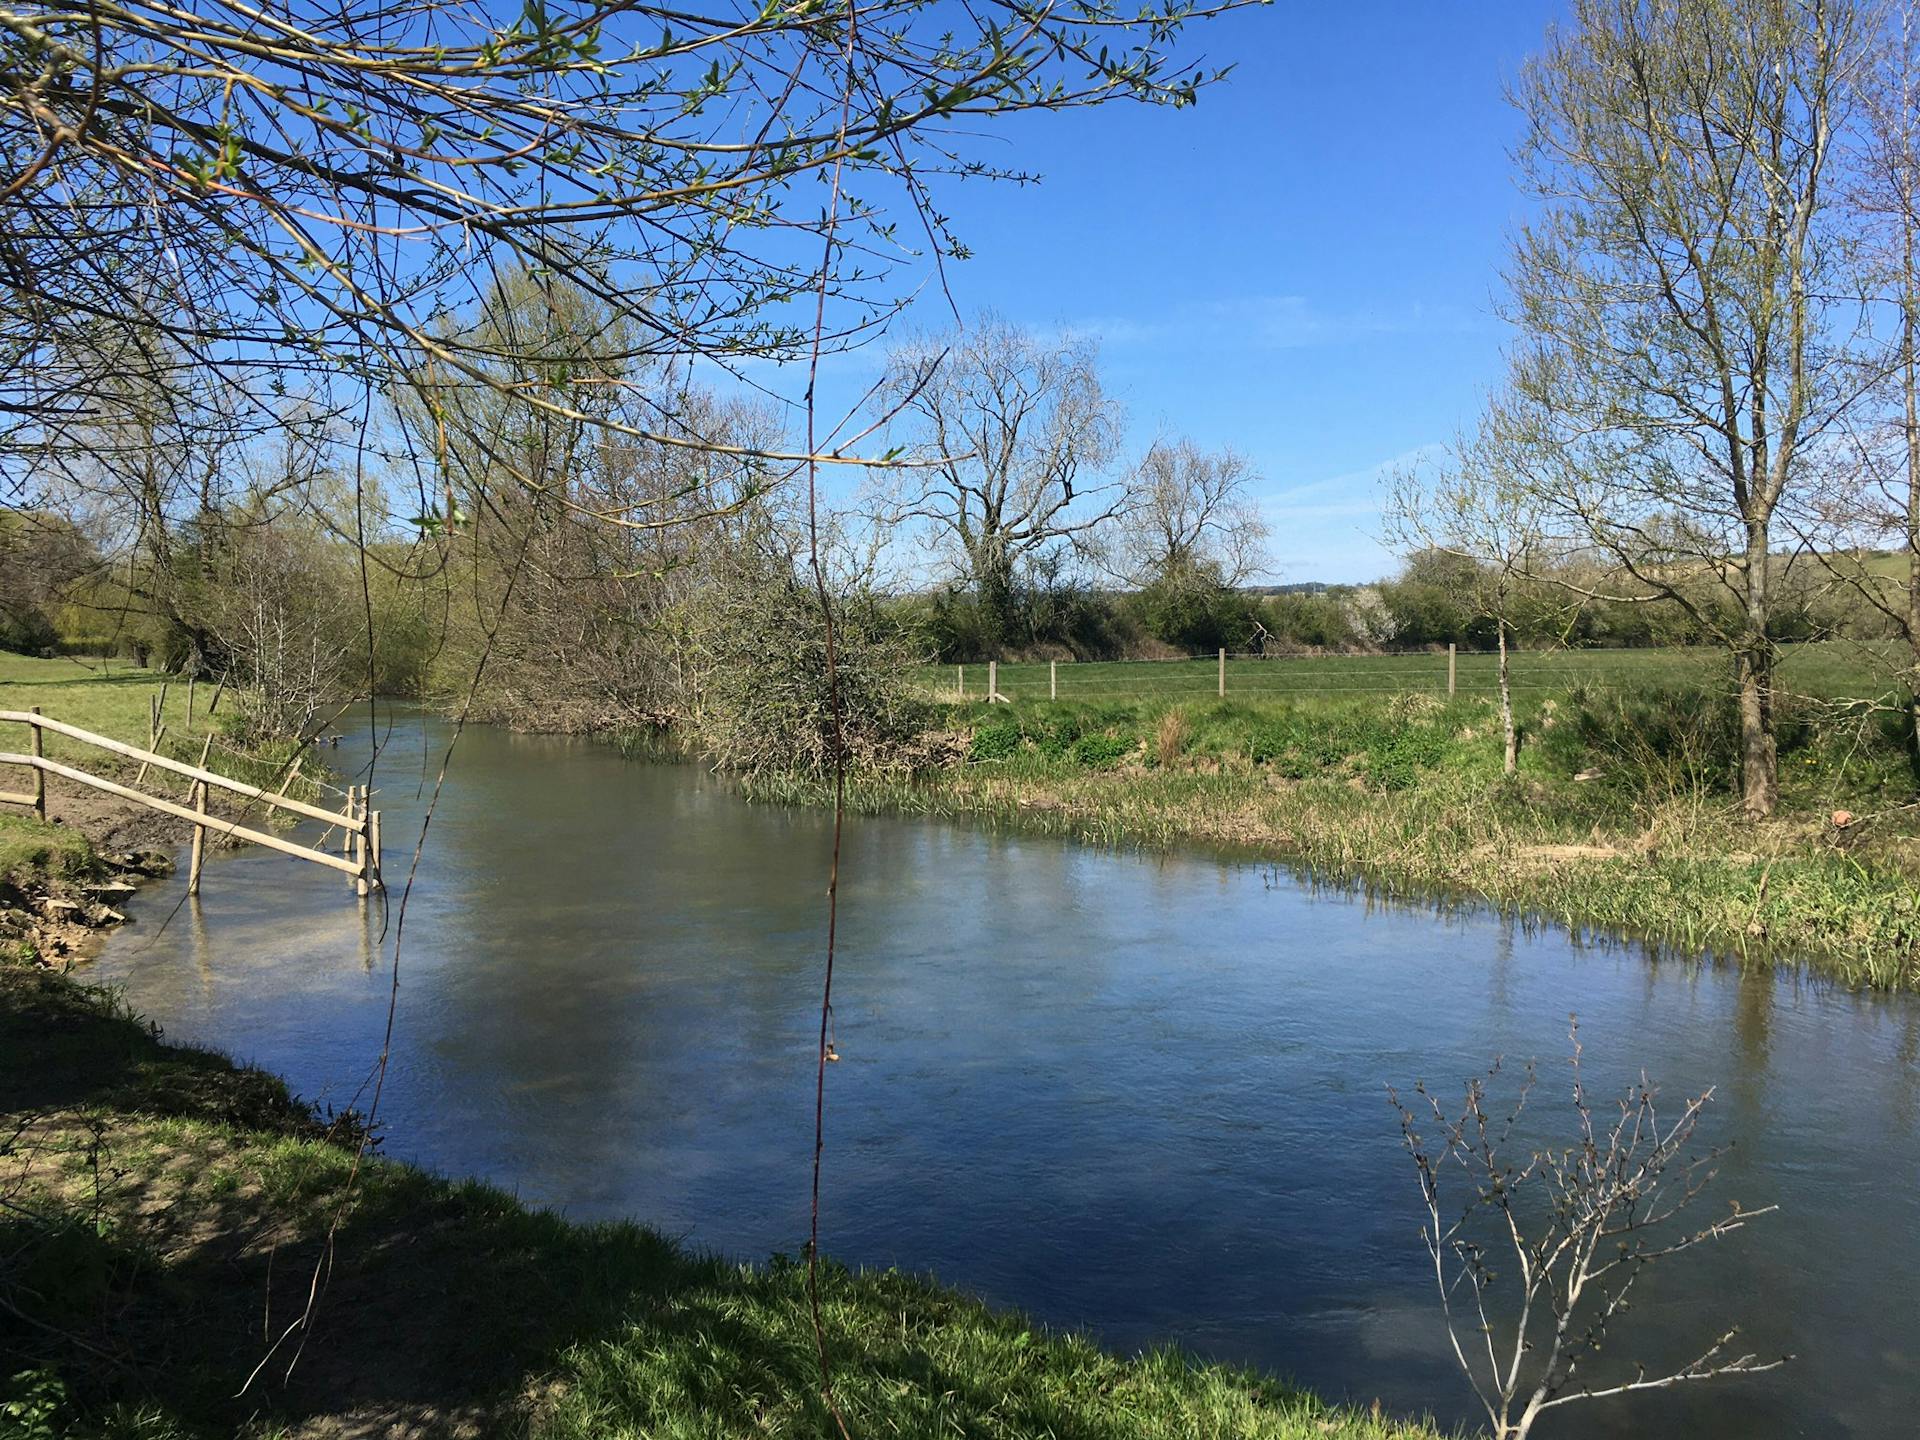 <p>The River Windrush is a tributary of the River Thames in central England. It rises near Snowshill in Gloucestershire and flows south east for about 65 km (40 mi) via Burford and Witney to meet the Thames at Newbridge in Oxfordshire. </p><p><br></p><p>The river gives its name to the village of Windrush in Gloucestershire, and also to the ship HMT Empire Windrush, which carried the first large group of postwar immigrants from the Caribbean to the UK in 1948. </p><p><br></p><p>The river is known for its scenic beauty and historical significance, as well as its wildlife and water quality.</p>